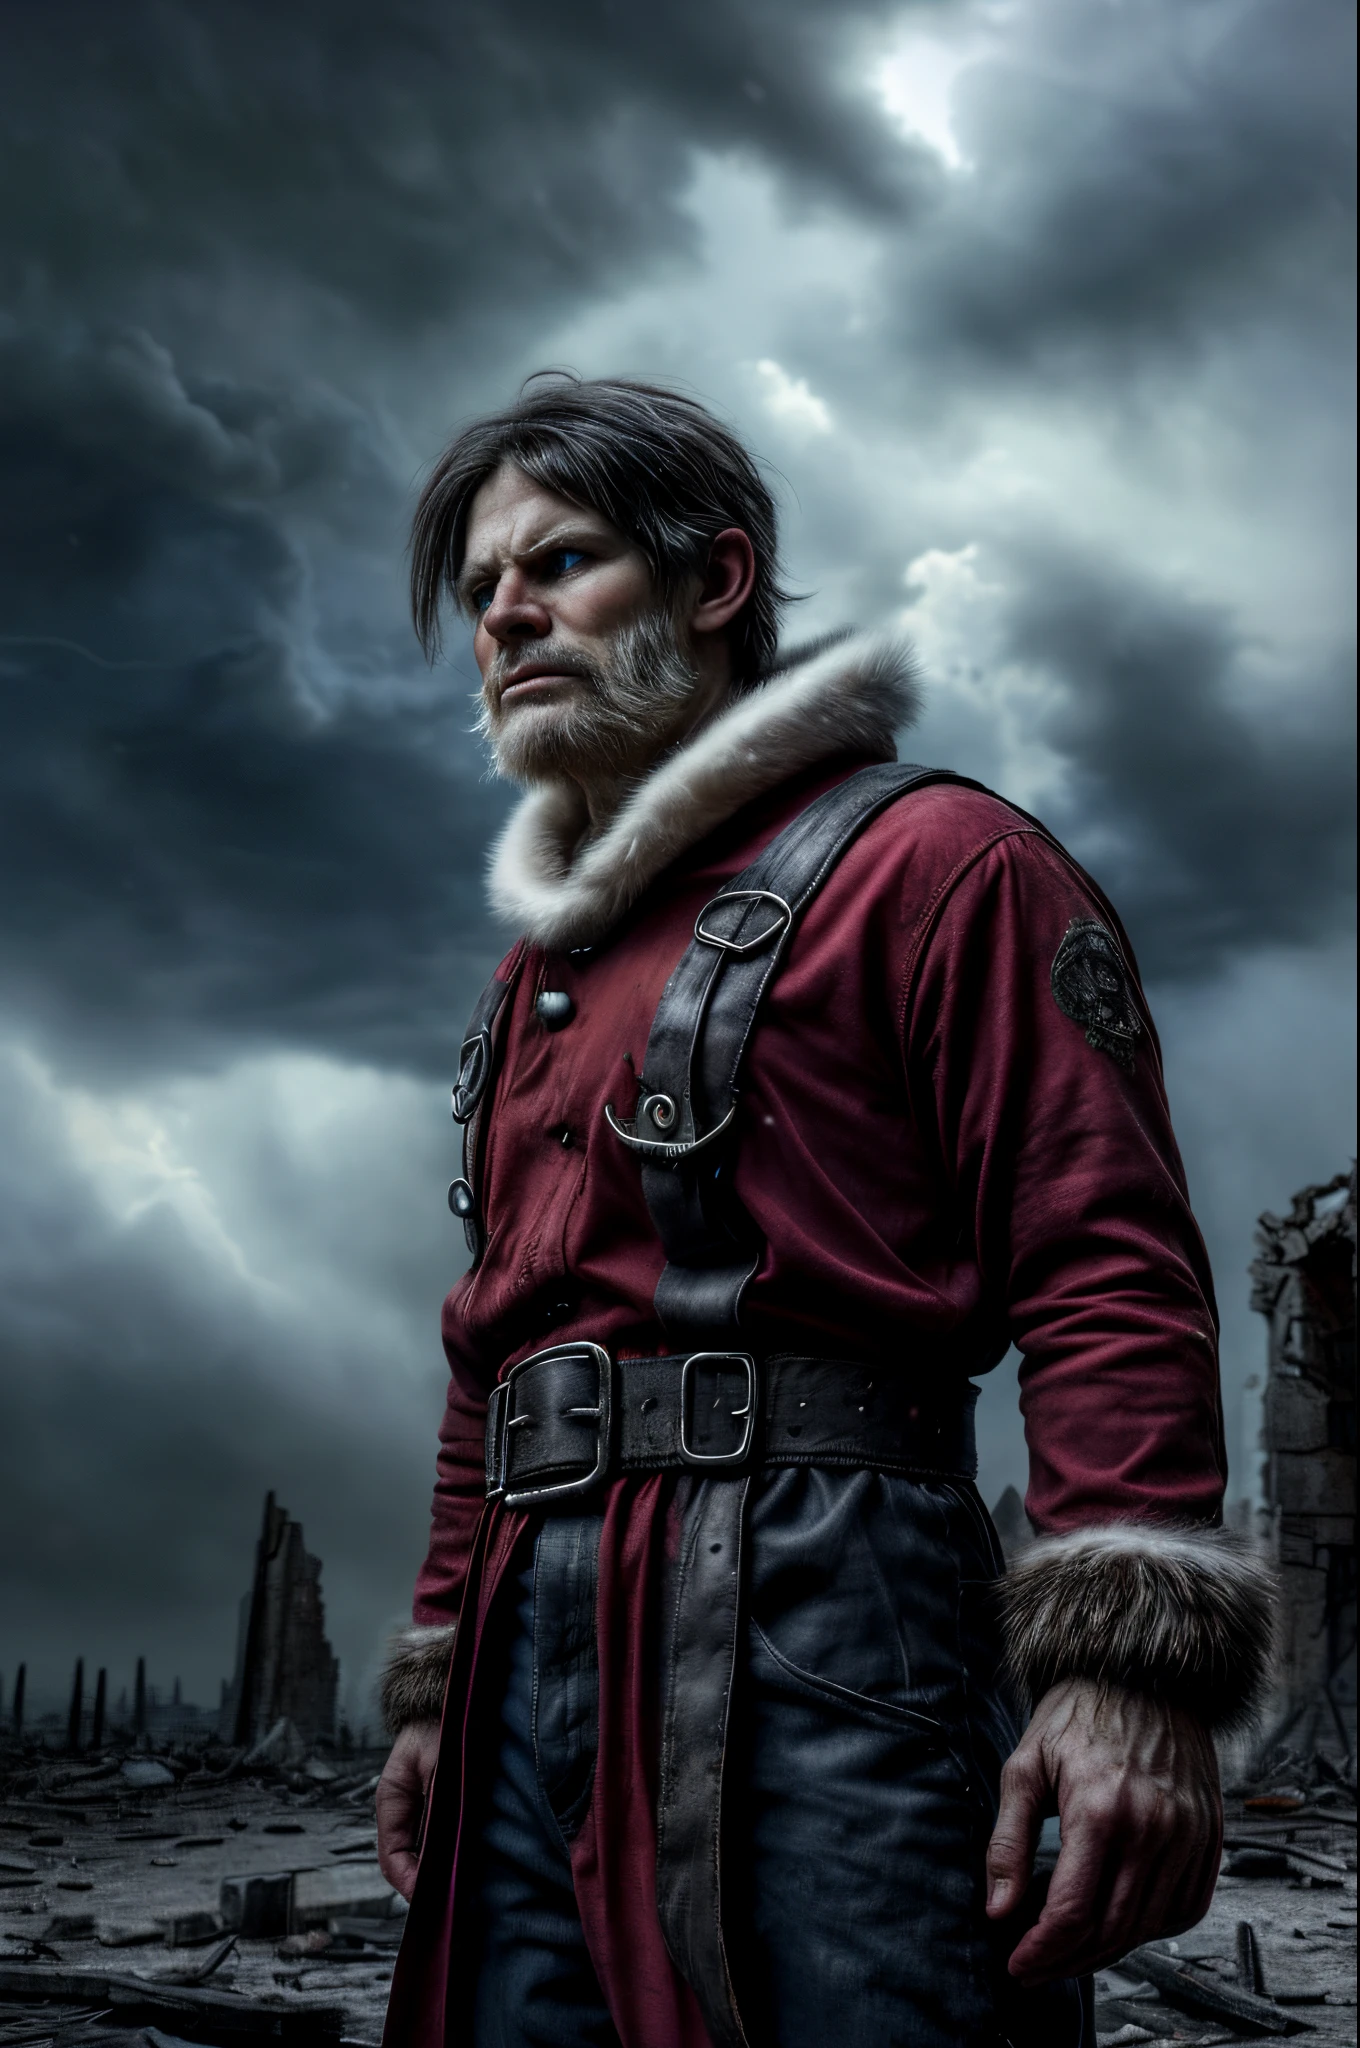 ((realistic portrait)) Santa Claus in post-apocalypse, (best quality, high resolution), (with piercing blue eyes), ((Red clothes with white fur collar and cuffs)), (dark, deserted) landscape, (surrounded by ruins and ruins) of civilization), (stands amidst the destruction), (snowflakes softly fall from the sky), (ominous clouds loom overhead), (a ray of sunlight piercing the darkness), (bright colors contrasting with the gloomy surroundings), (the sound of howling winds and distant echoes in the air), (the smell of burnt wood and ash filling the atmosphere), (a feeling of hope and resilience in his gaze), (the whole scene creates a surreal and mesmerizingly beautiful atmosphere).